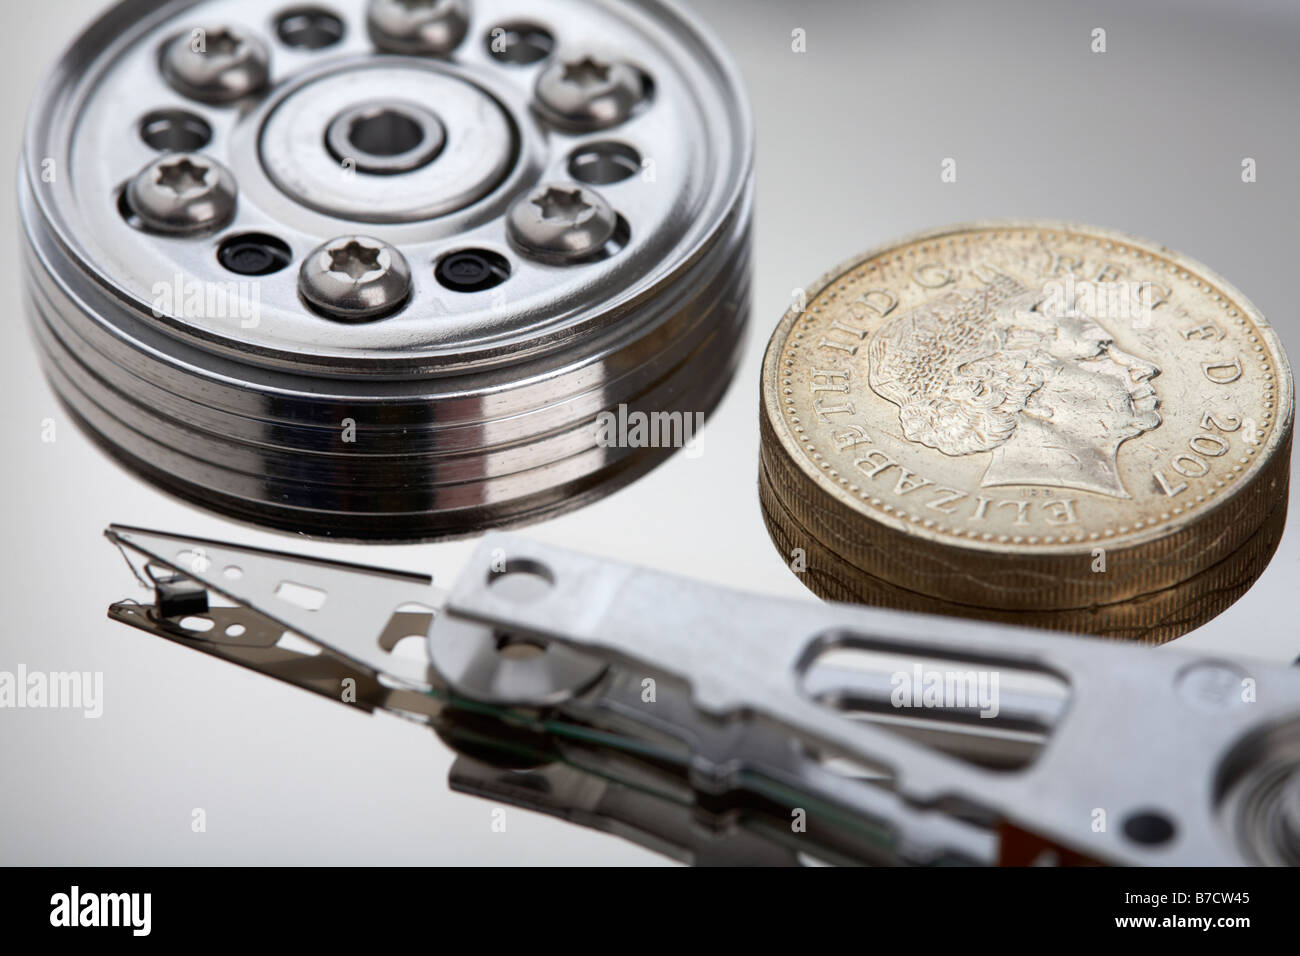 uk british pound coin sitting on the disc of an opened computer hard drive Stock Photo